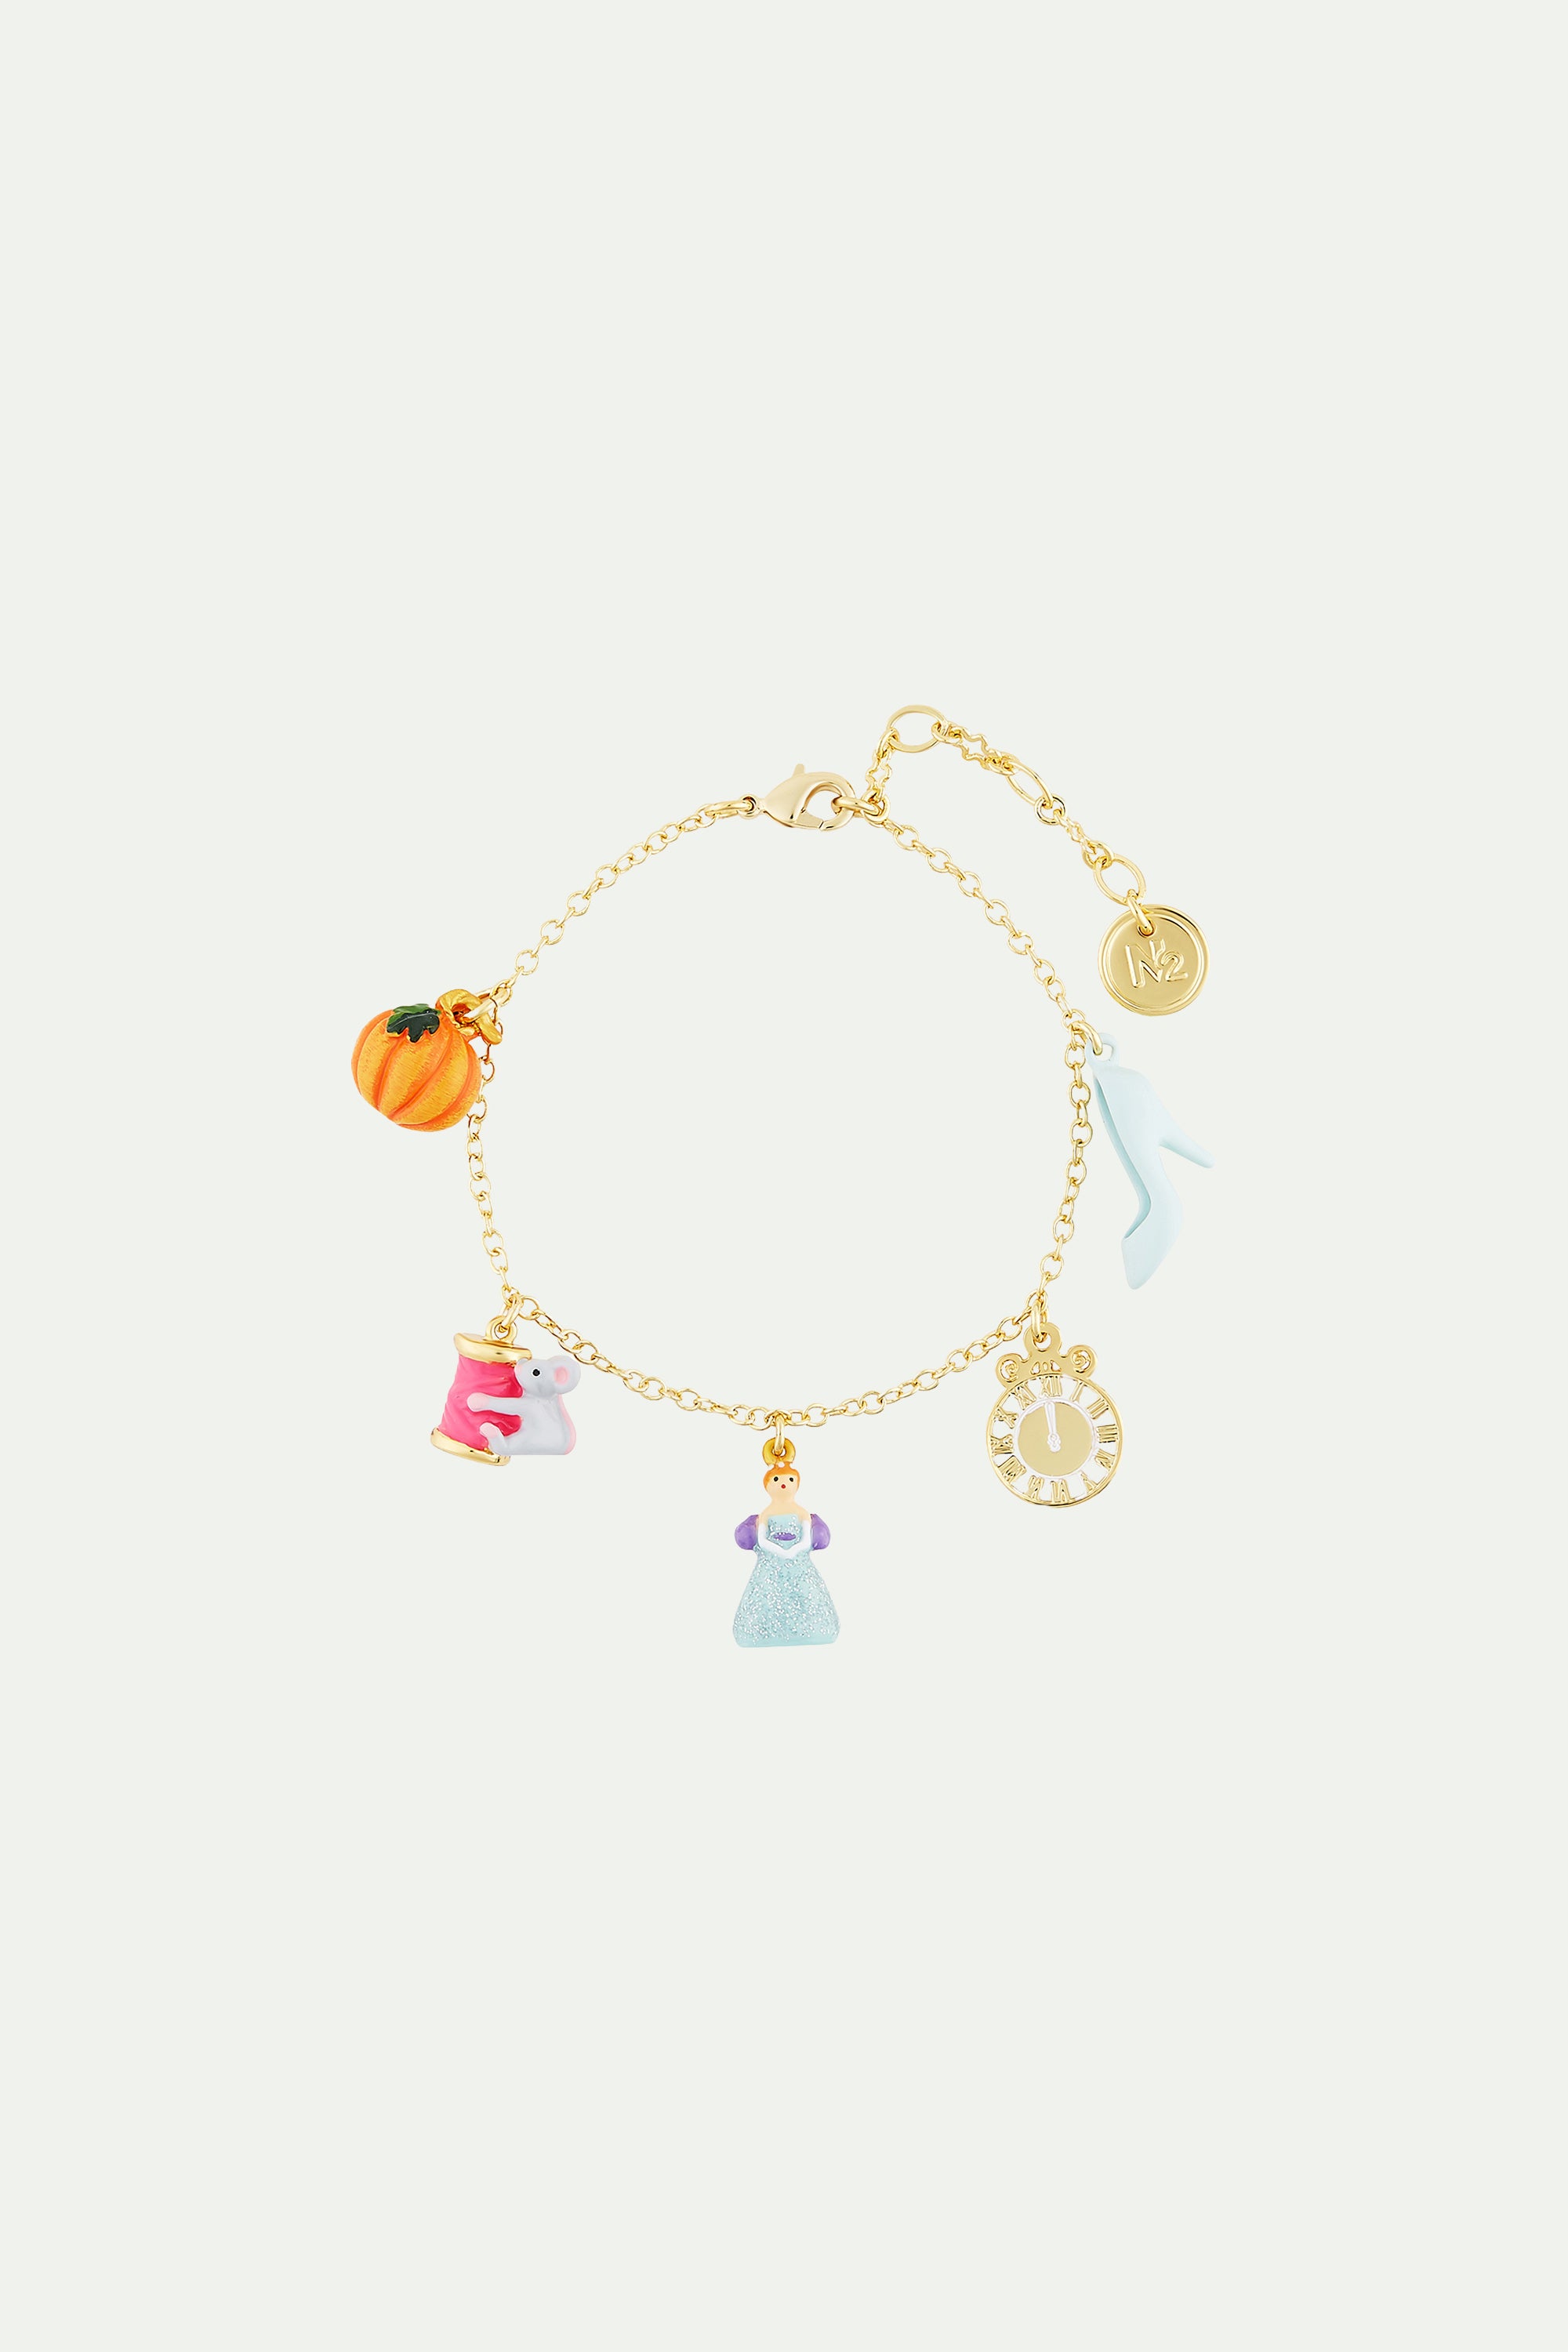 Pumpkin, Spool of Thread and Mouse, Cinderella, Clock and Slipper charm bracelet